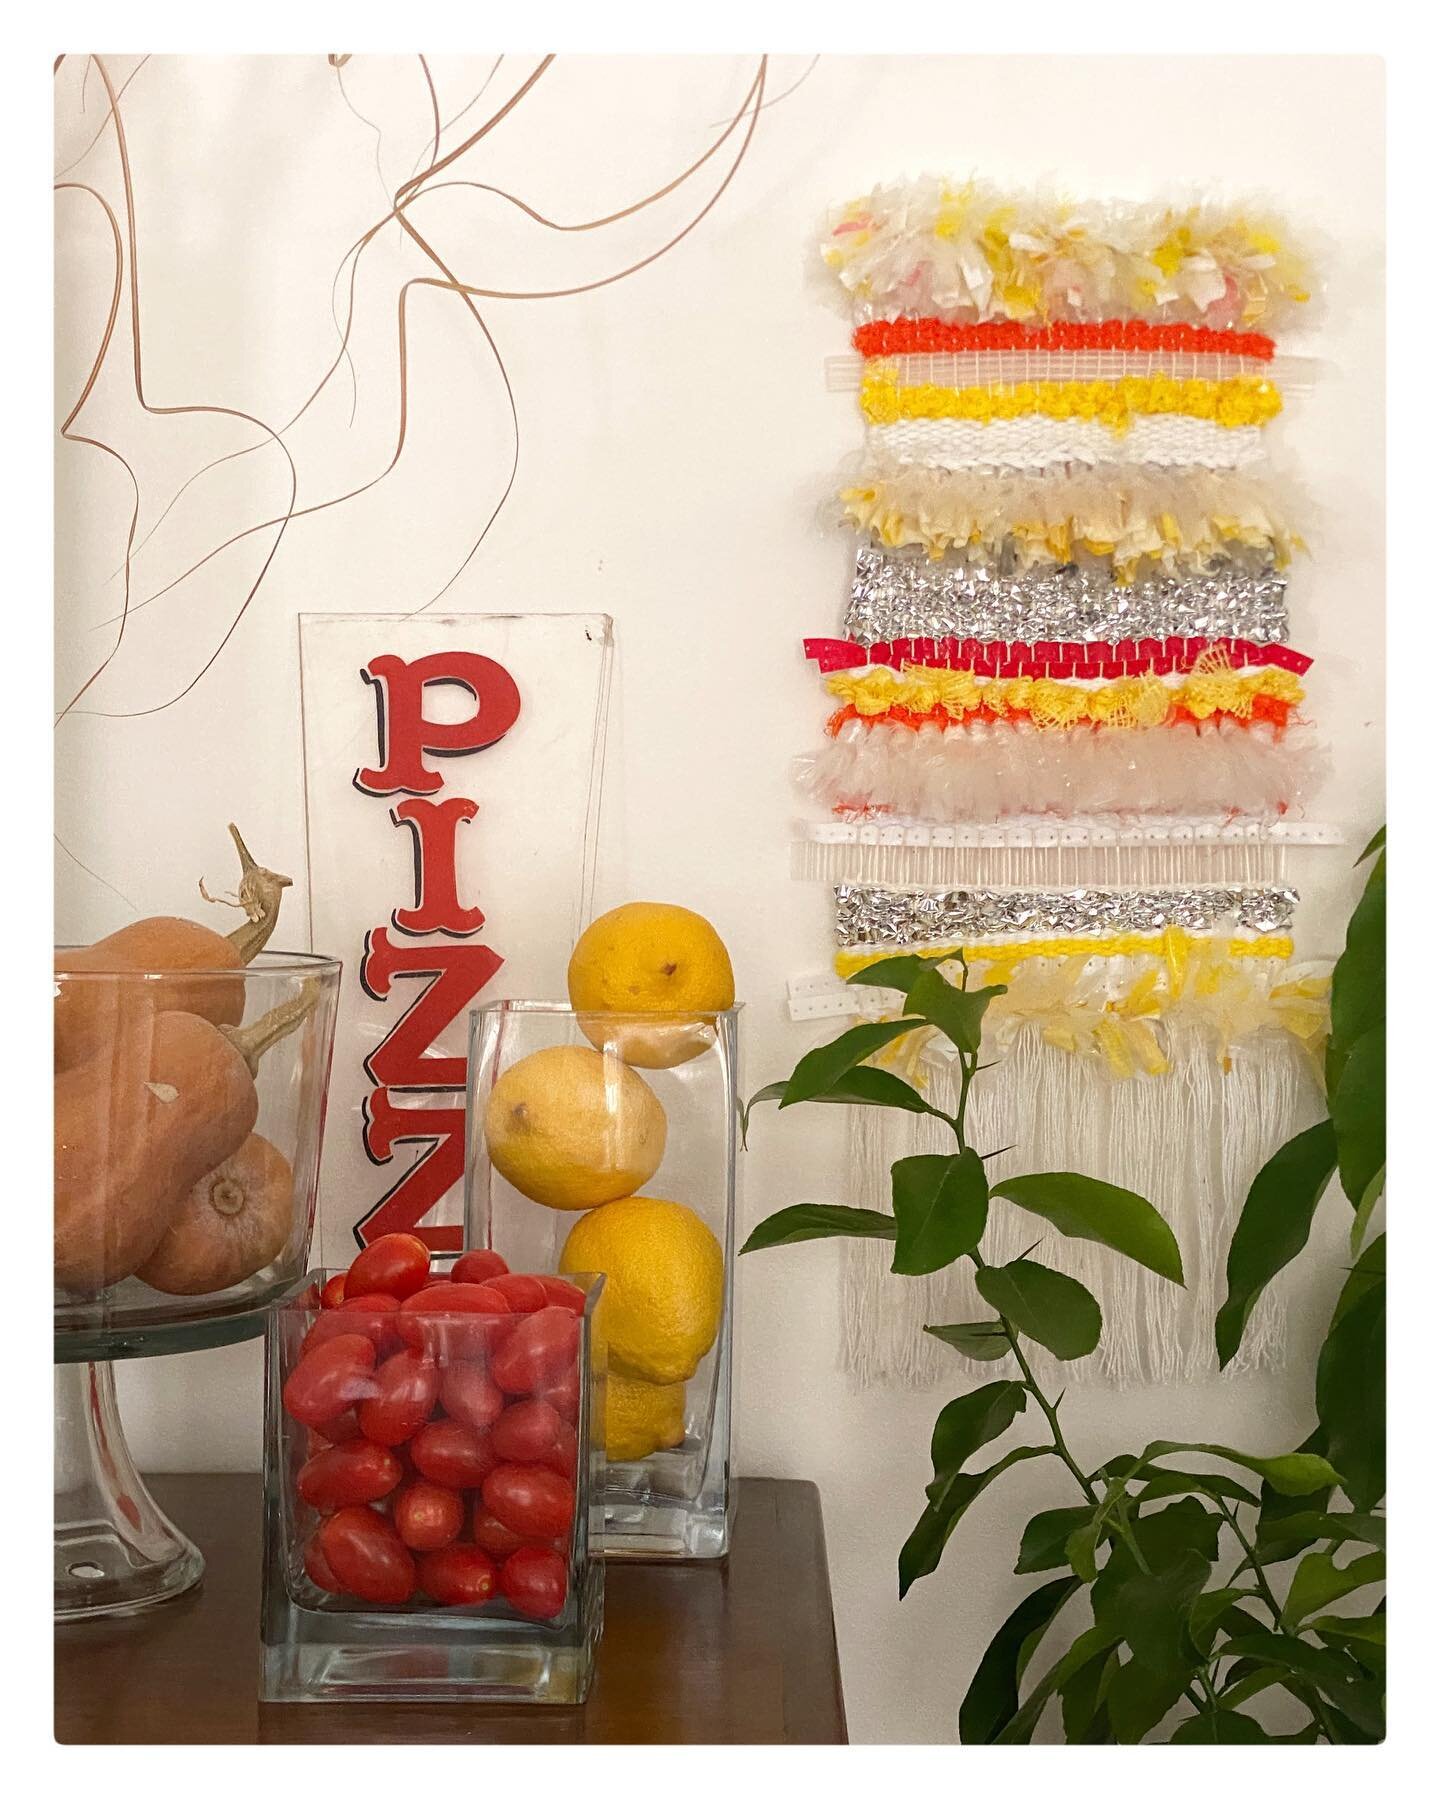 24/28&hellip; of my make one project a day in February. 

This is the 3rd project on my tapestry/frame loom.

I&rsquo;ve been saving lemon, lime, avocado, onion, sweet potato bags, the top strips and strings from bags of bird seed, misc plastic bags,